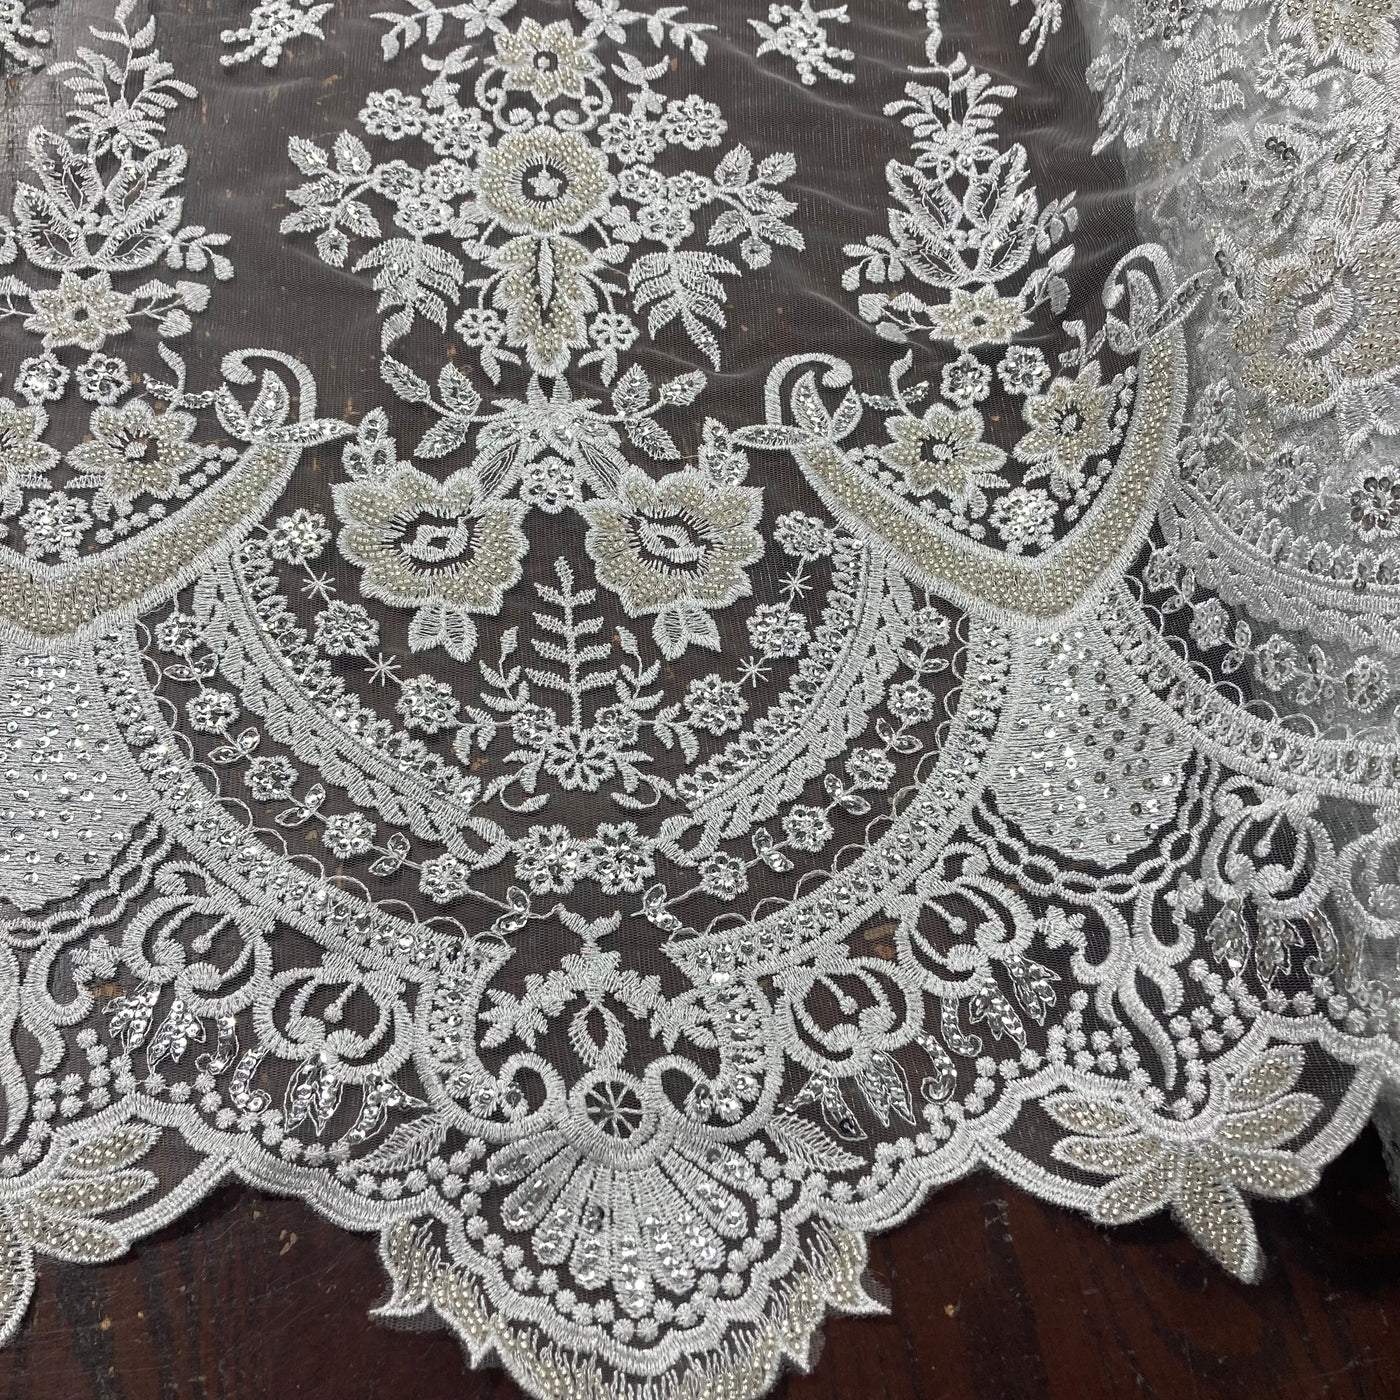 Embroidered & Heavy Beaded Silver Net Fabric with Beads. Lace Usa